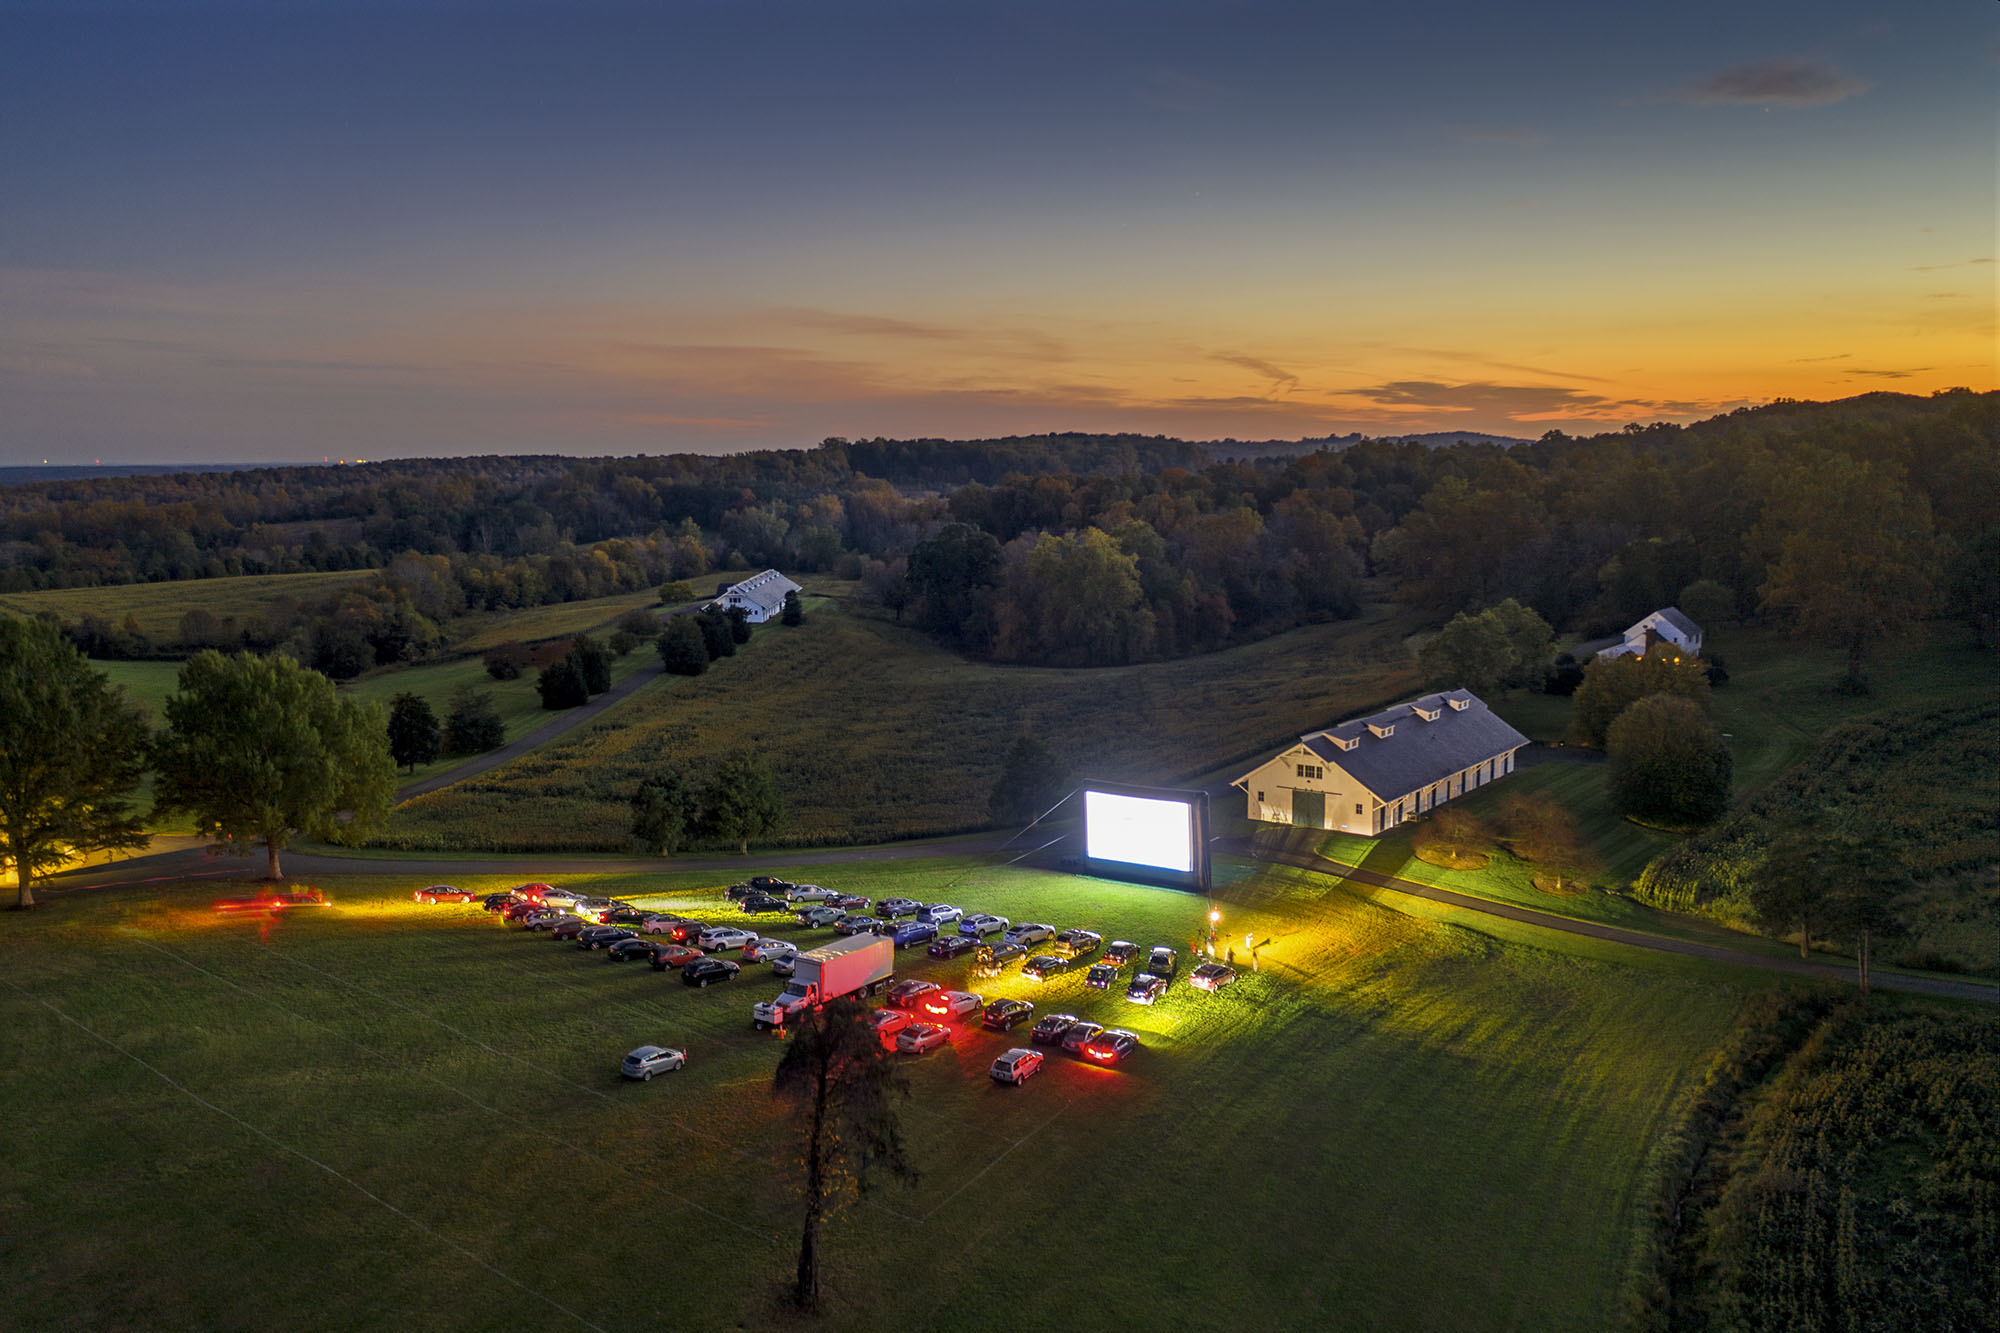 A drive-in movie event at Morven Farm during the 2020 Virginia Film Festival. (Photo by Sanjay Suchak, University Communications)